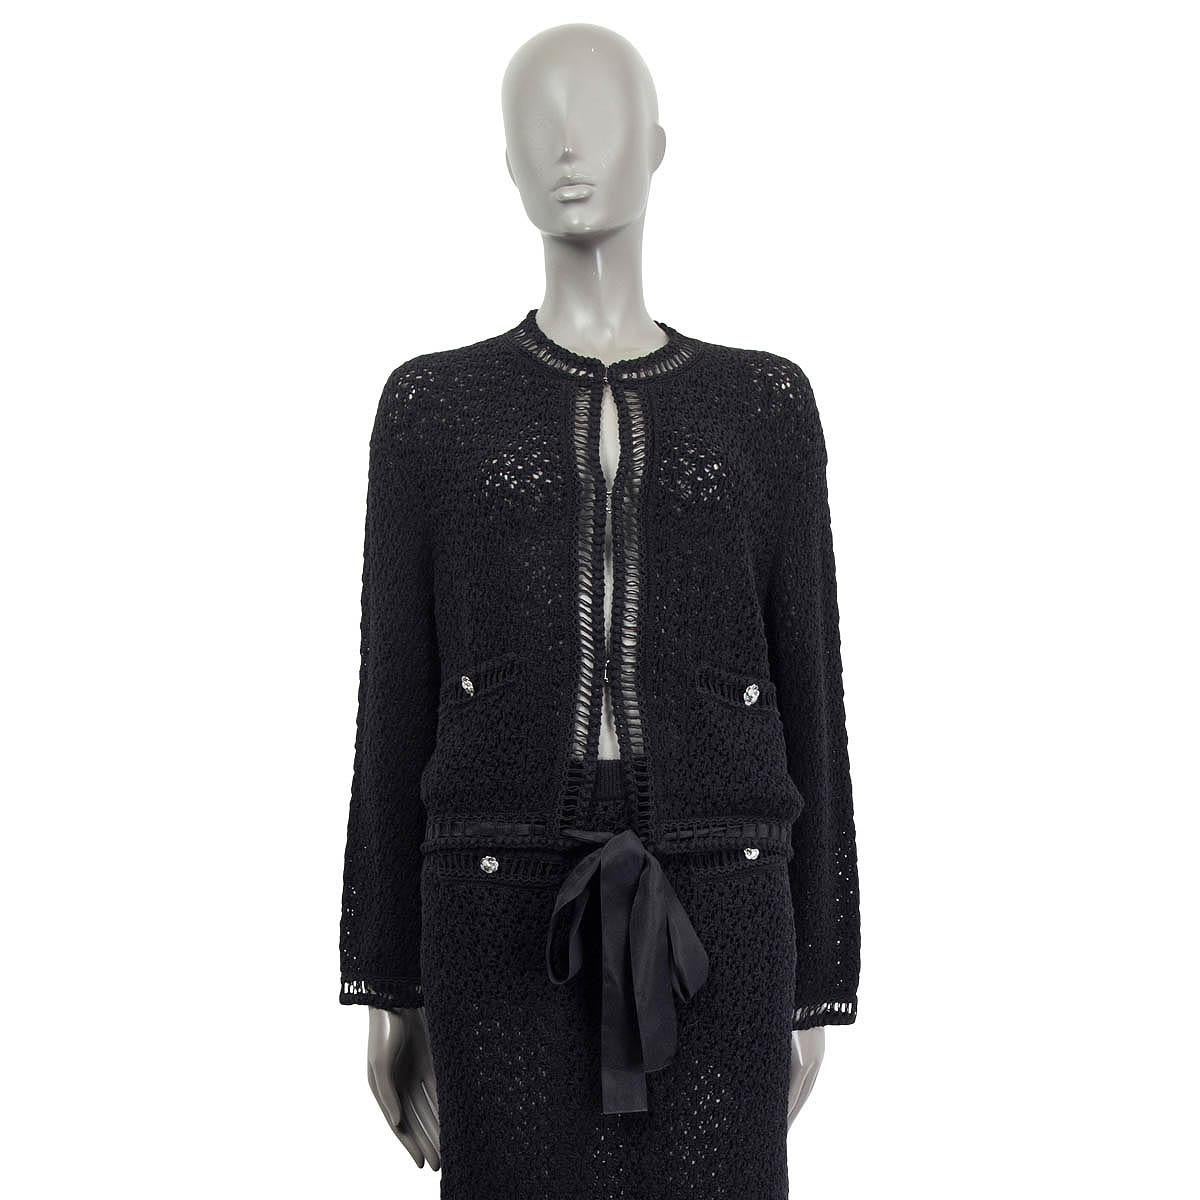 100% authentic  Chanel longsleeve cardigan in black cotton (65%) and polyamide (35%). Pre Spring/summer 2020 collection. Embellished with two faux slit pockets and silver metallic flower buttons. Has an elastic band and opens with hooks and a black